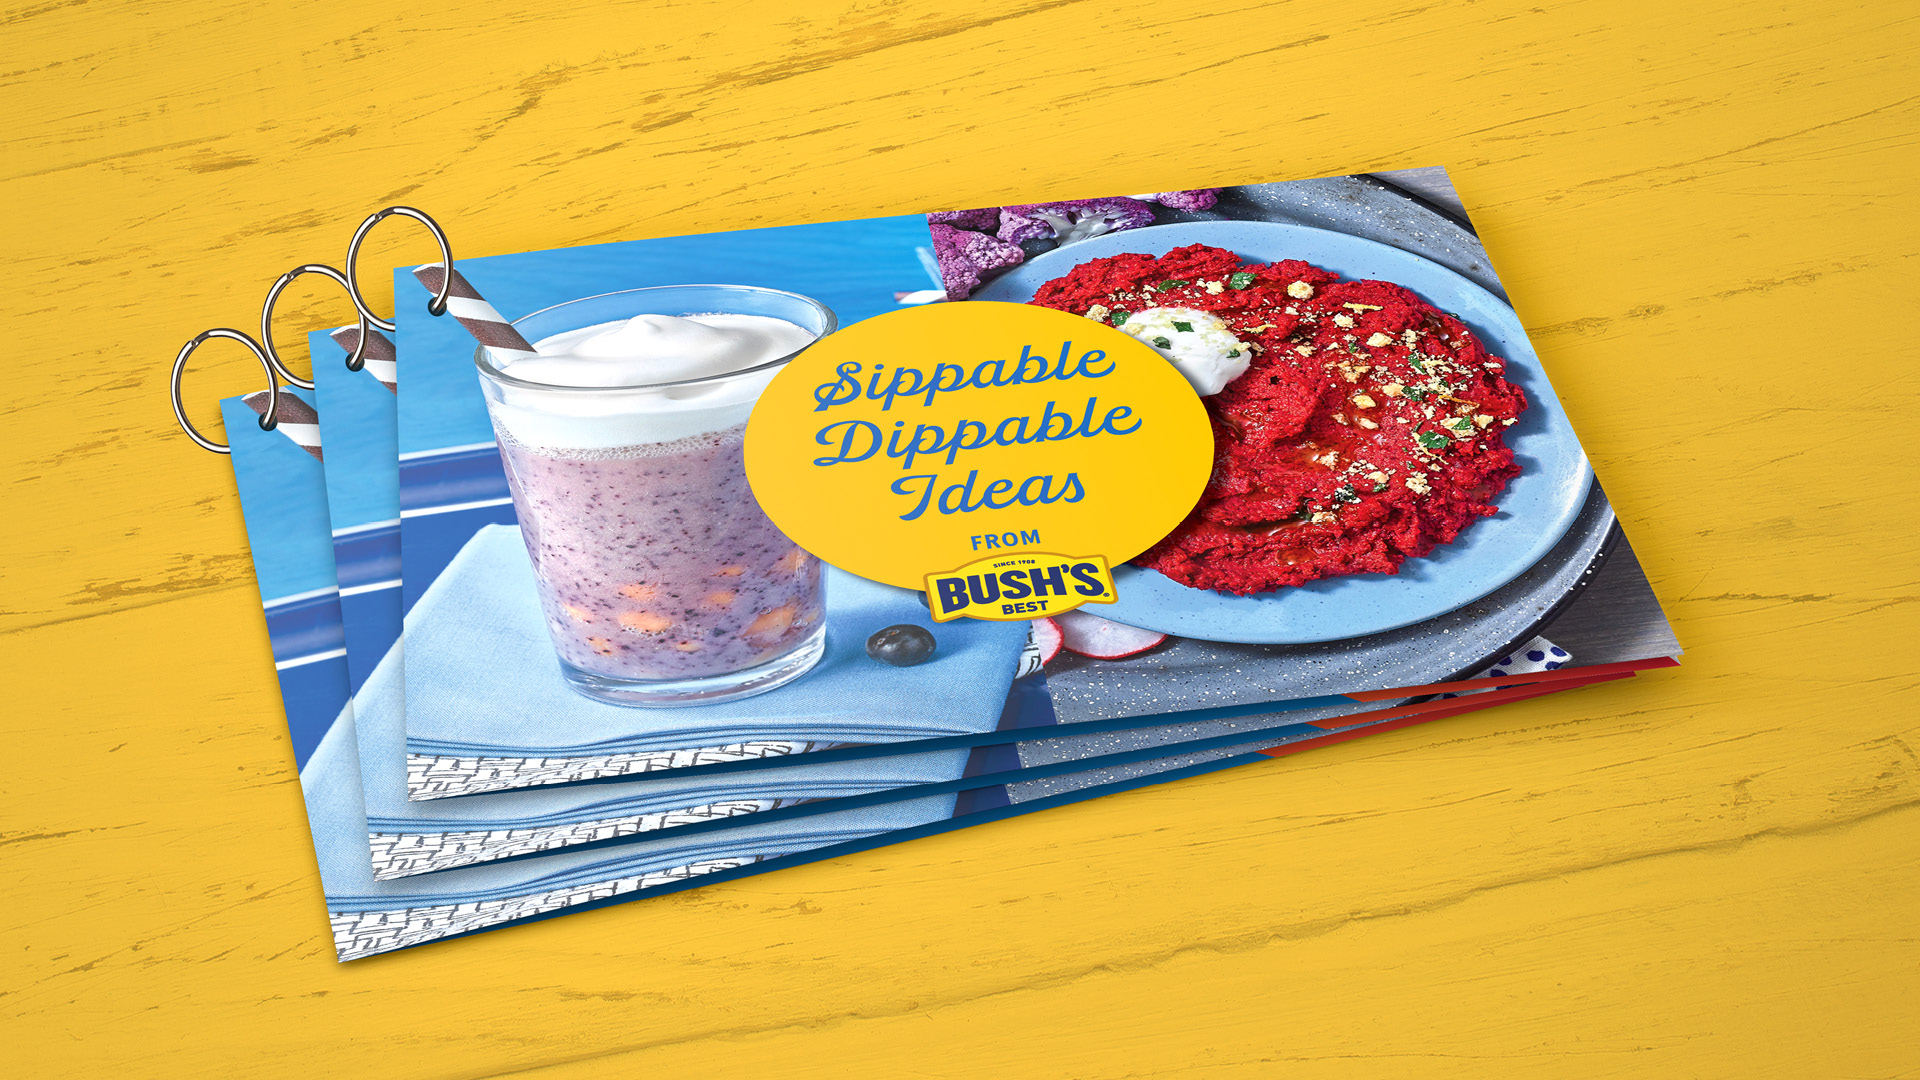 Bush's Sips and Dips recipe guide. Three printed ringed booklets that say "Sippable Dippable Ideas."